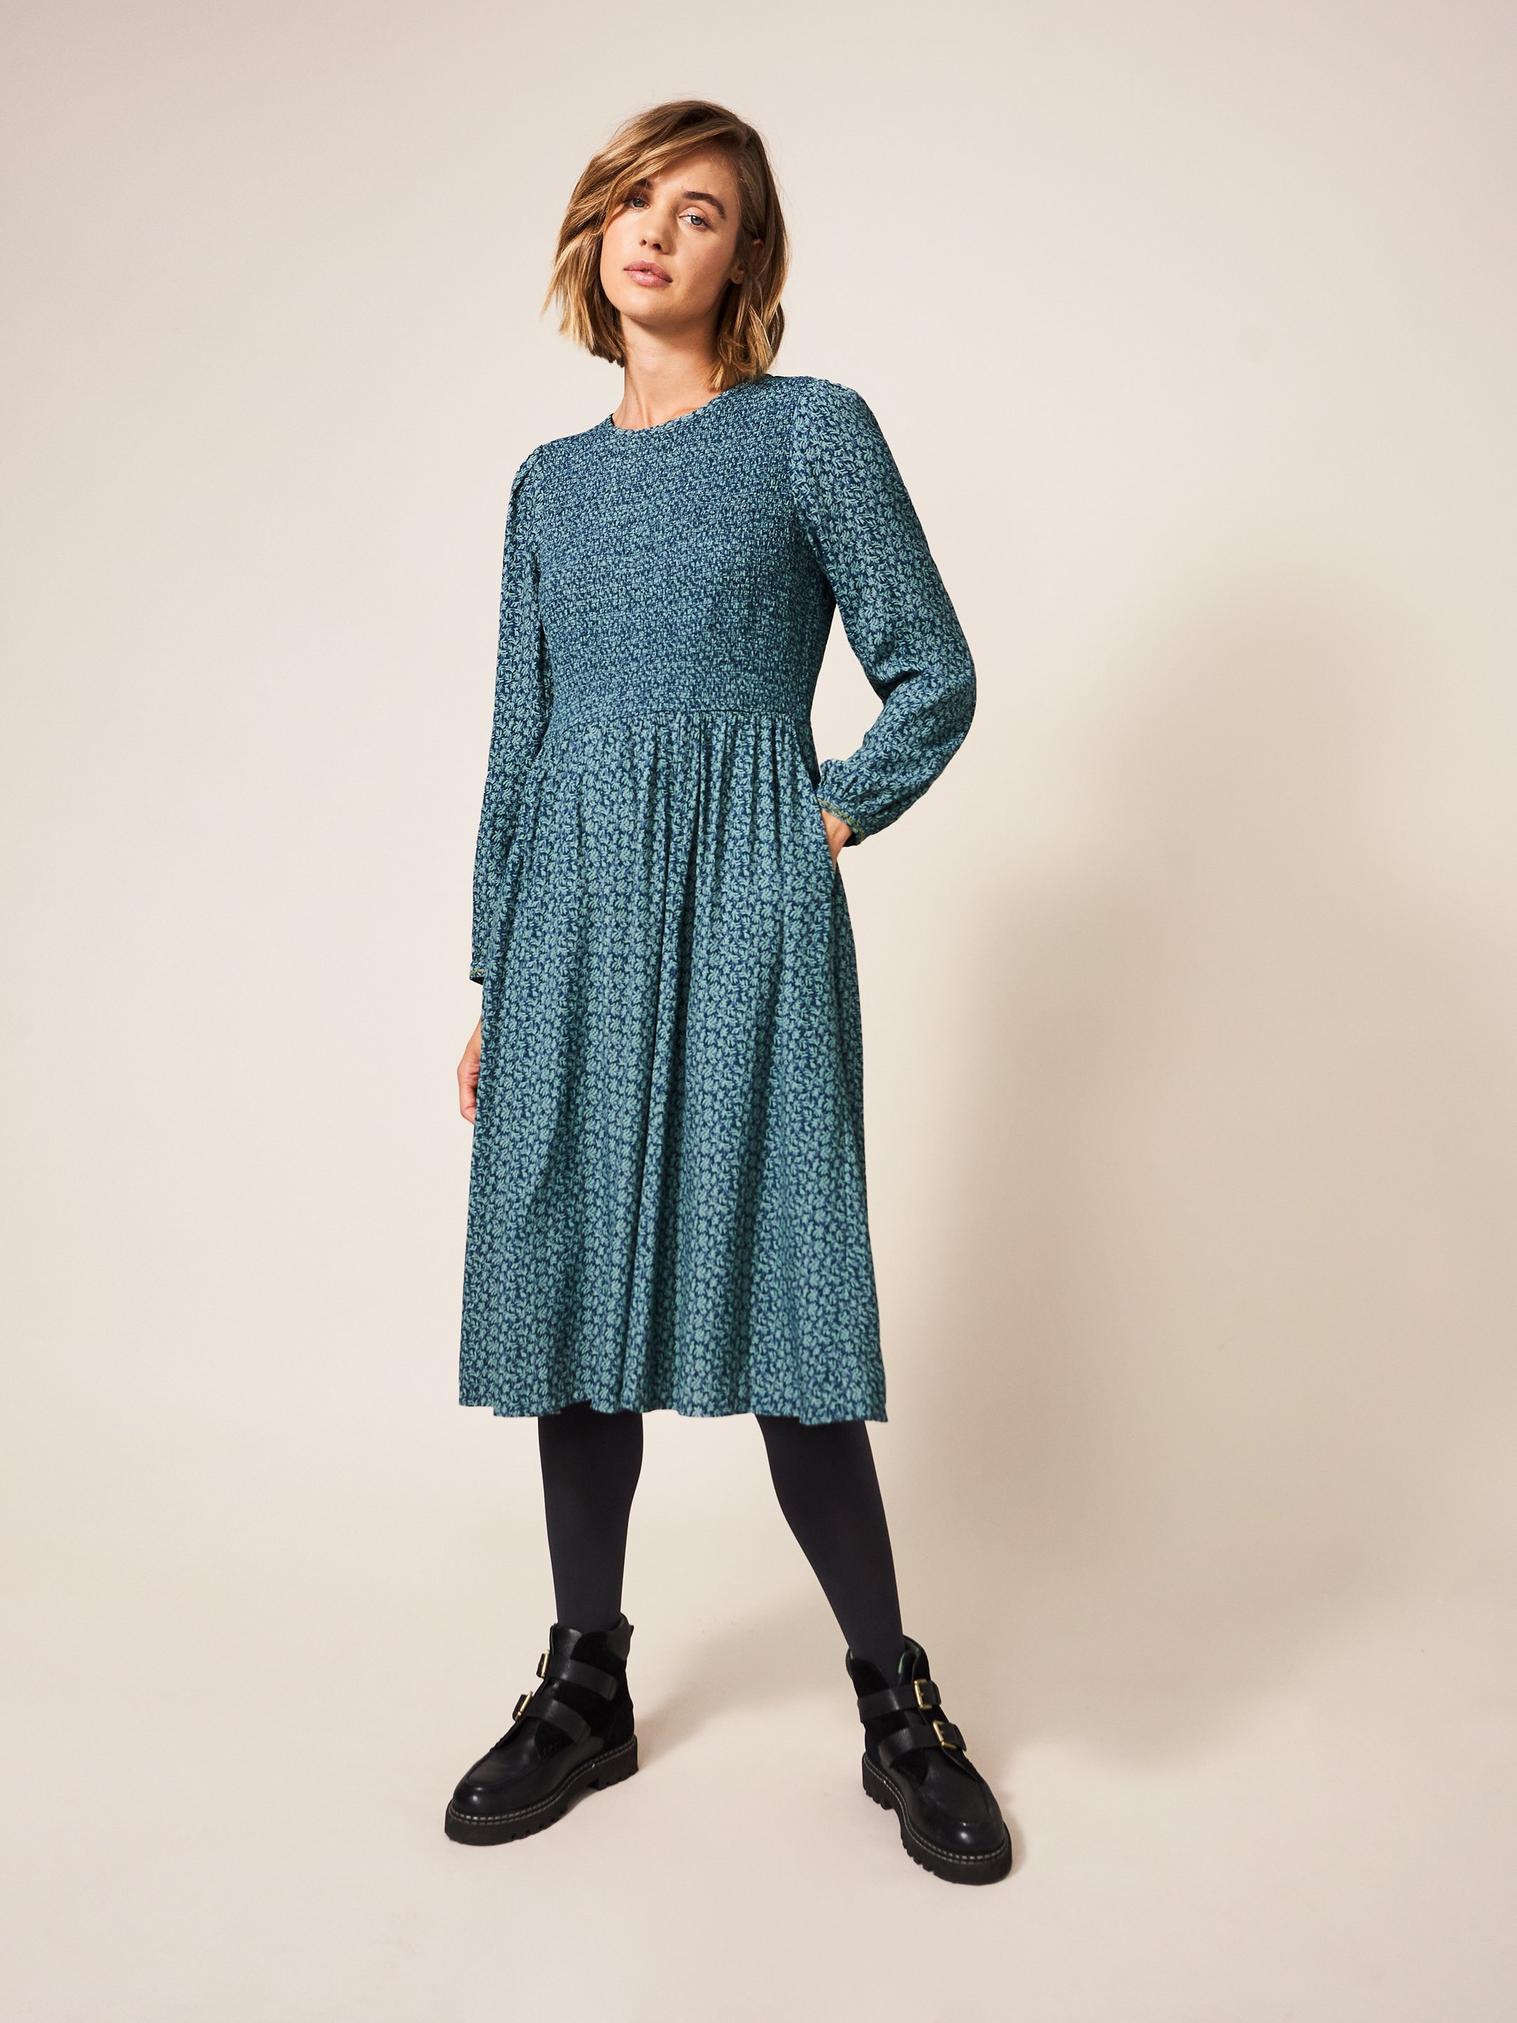 Aneth Shirred Dress in TEAL MLT - LIFESTYLE